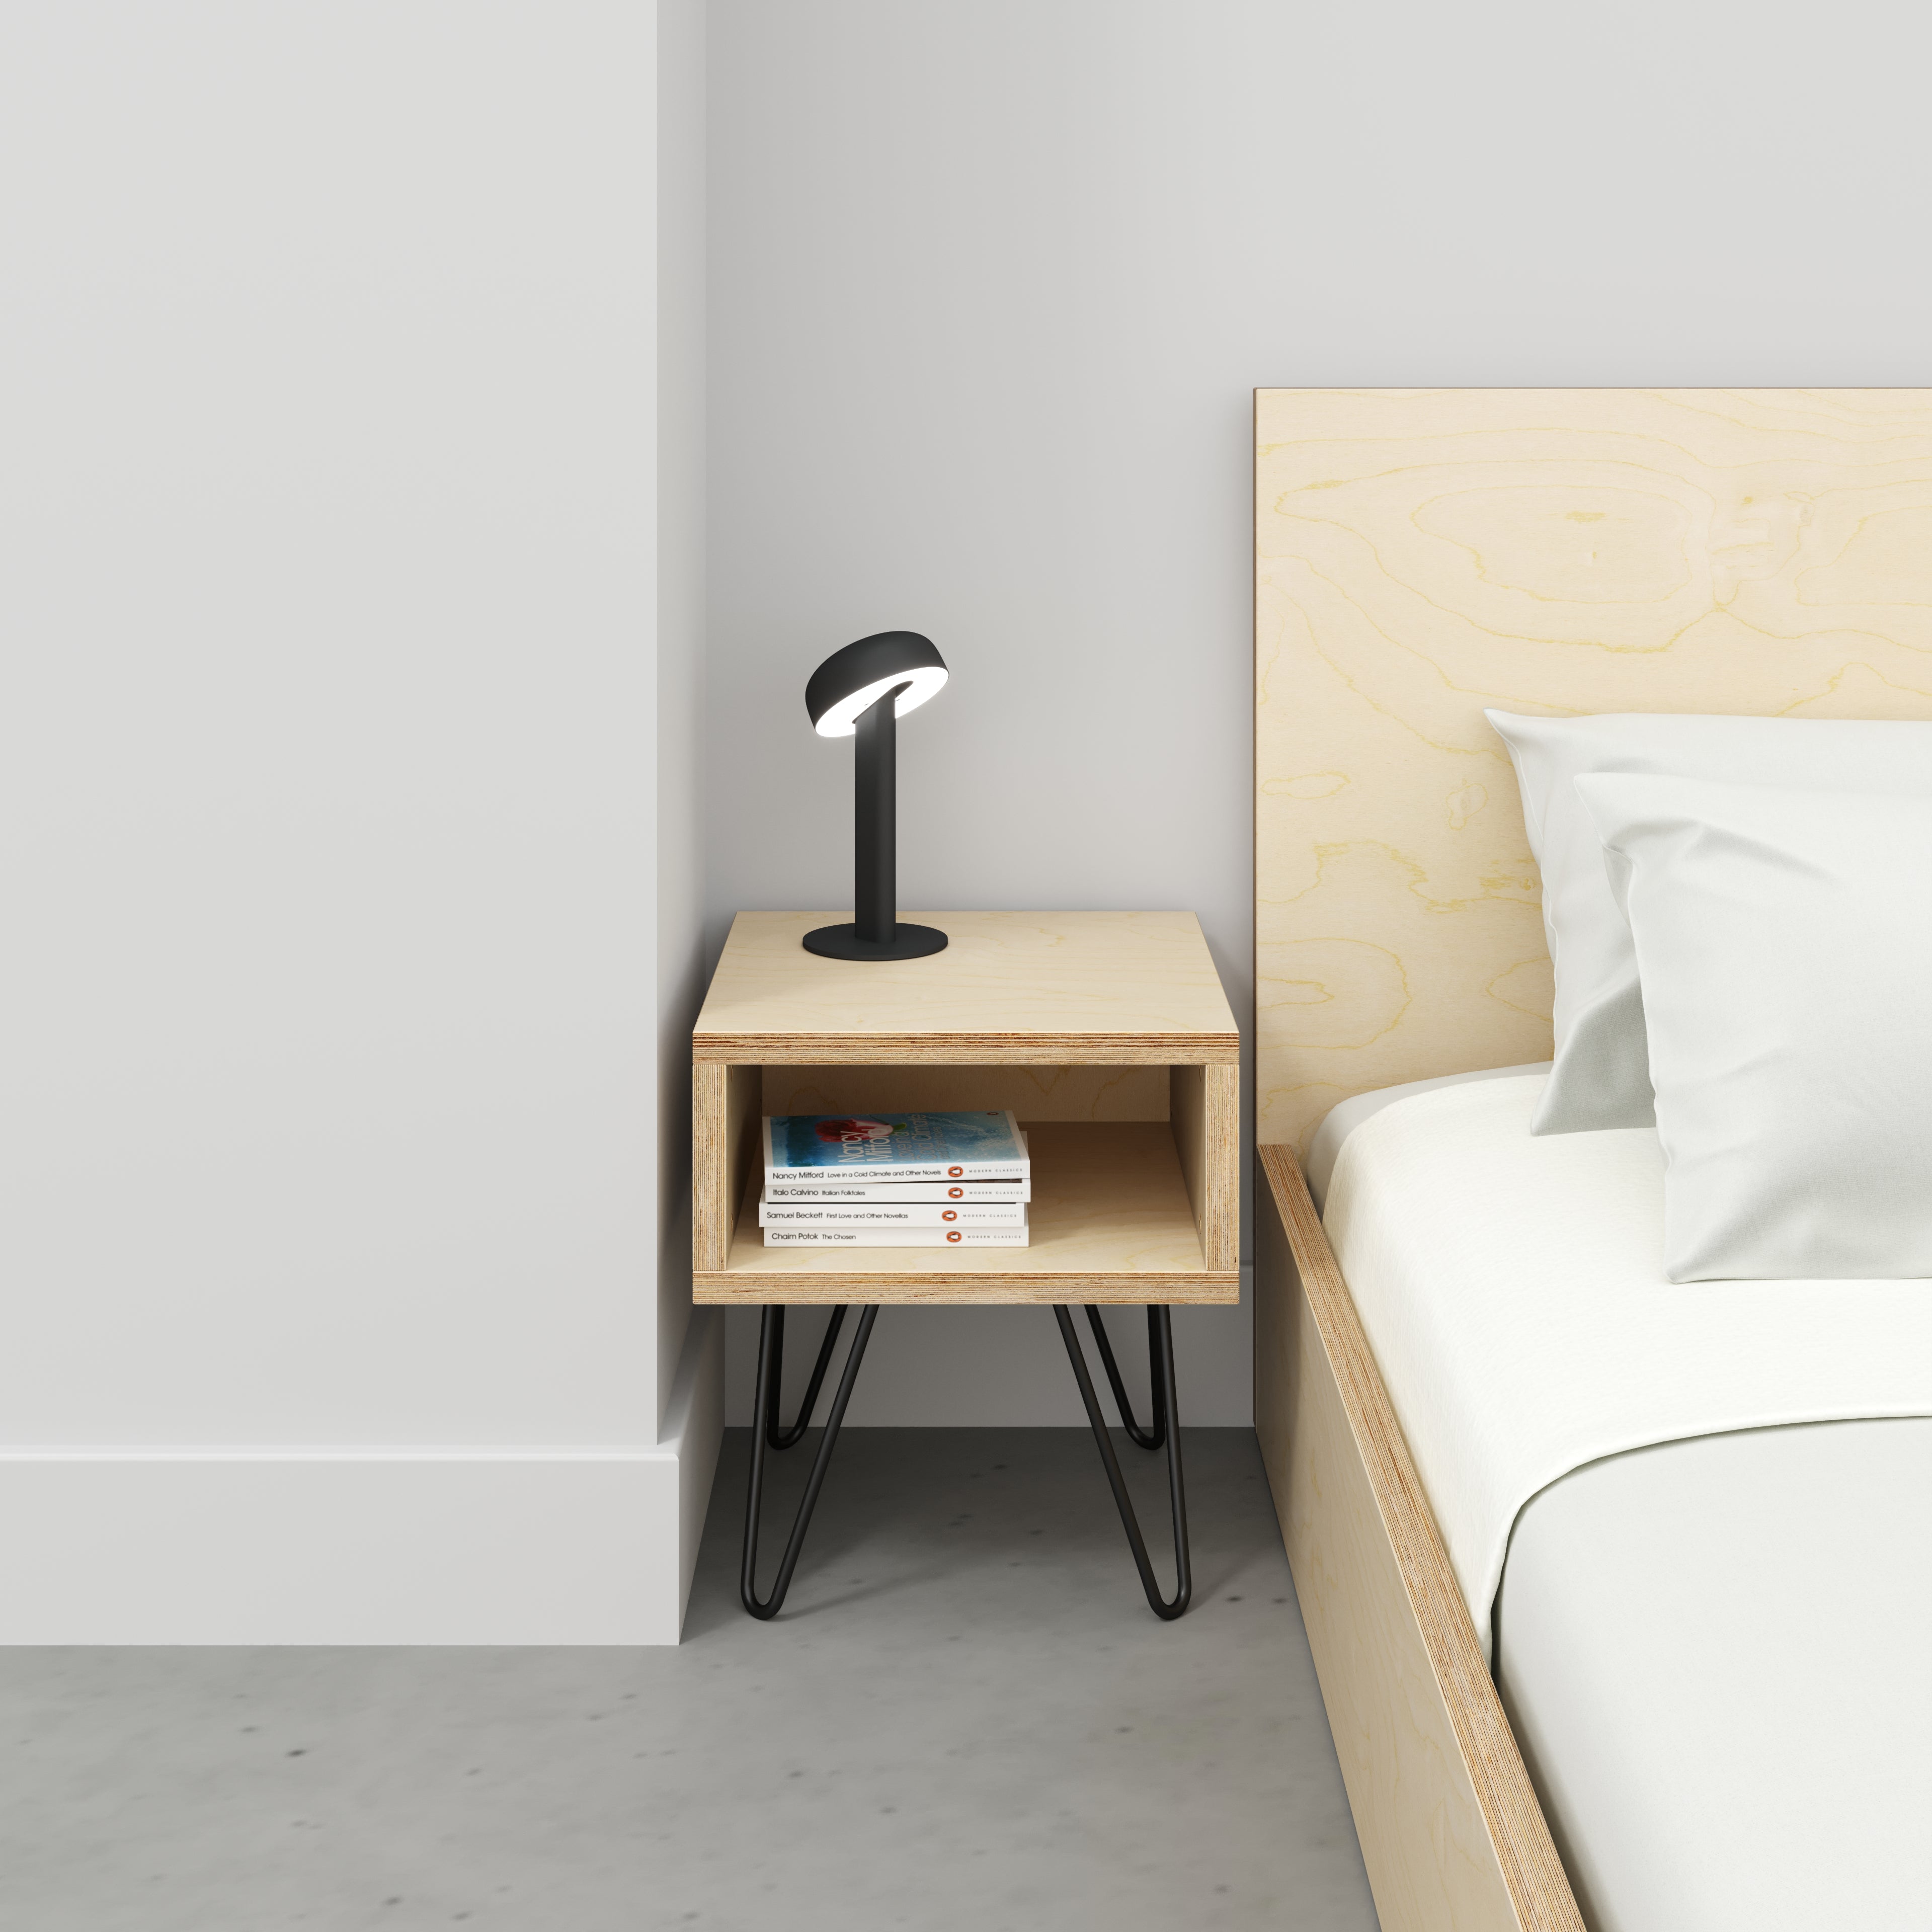 Bedside Table with Box Storage and Black Hairpin Legs - Plywood Birch - 400(w) x 400(d) x 450(h)